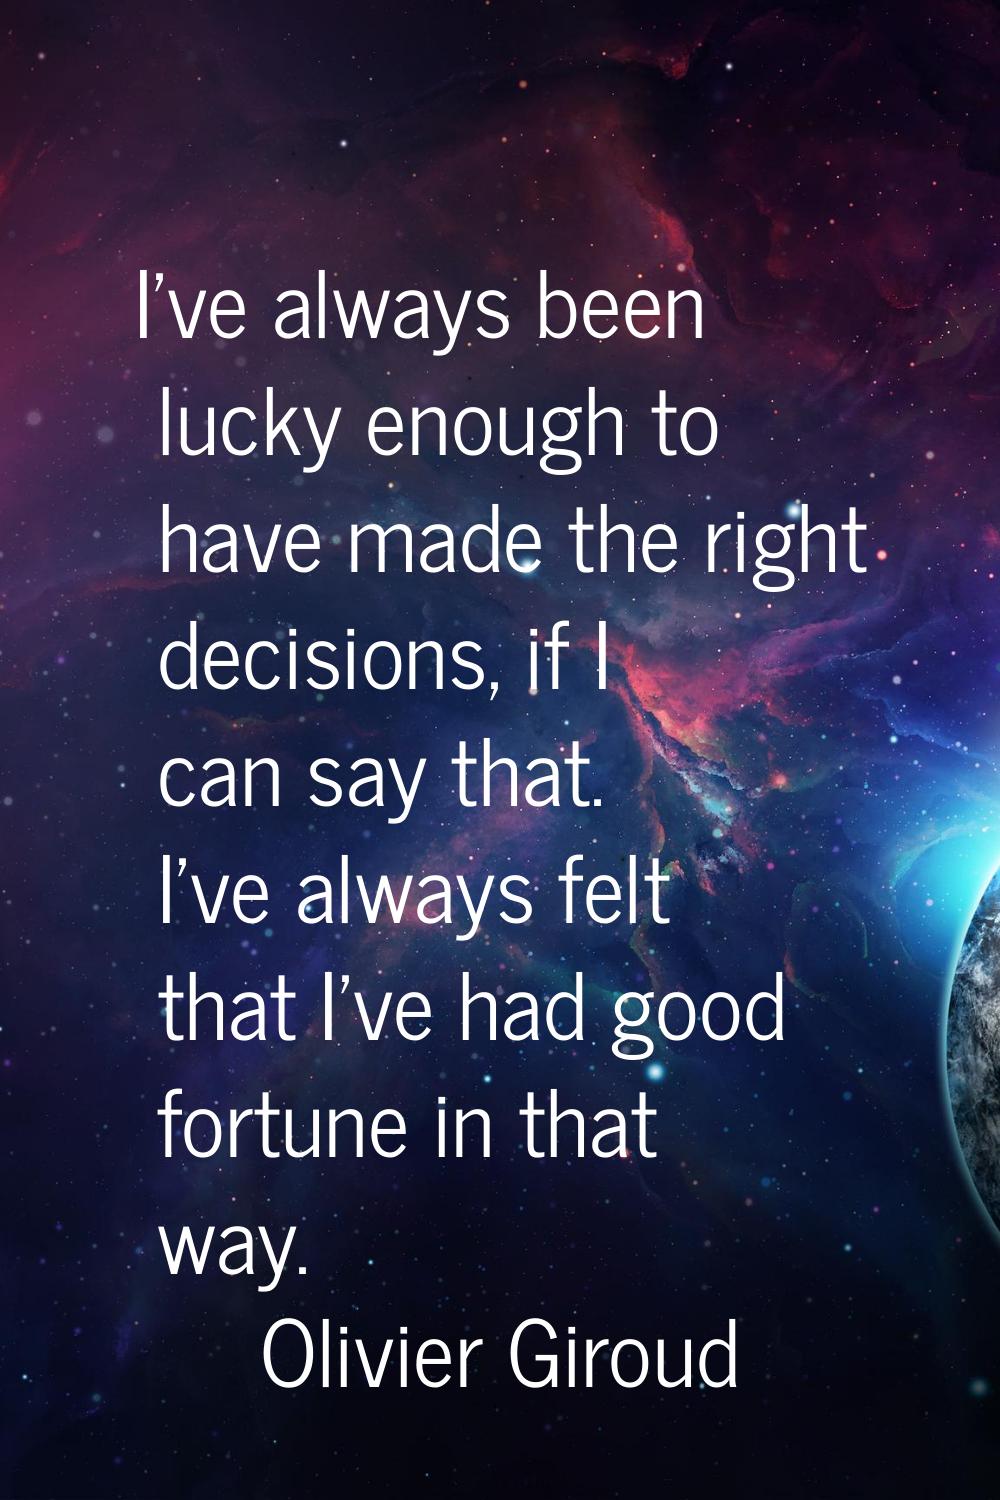 I've always been lucky enough to have made the right decisions, if I can say that. I've always felt